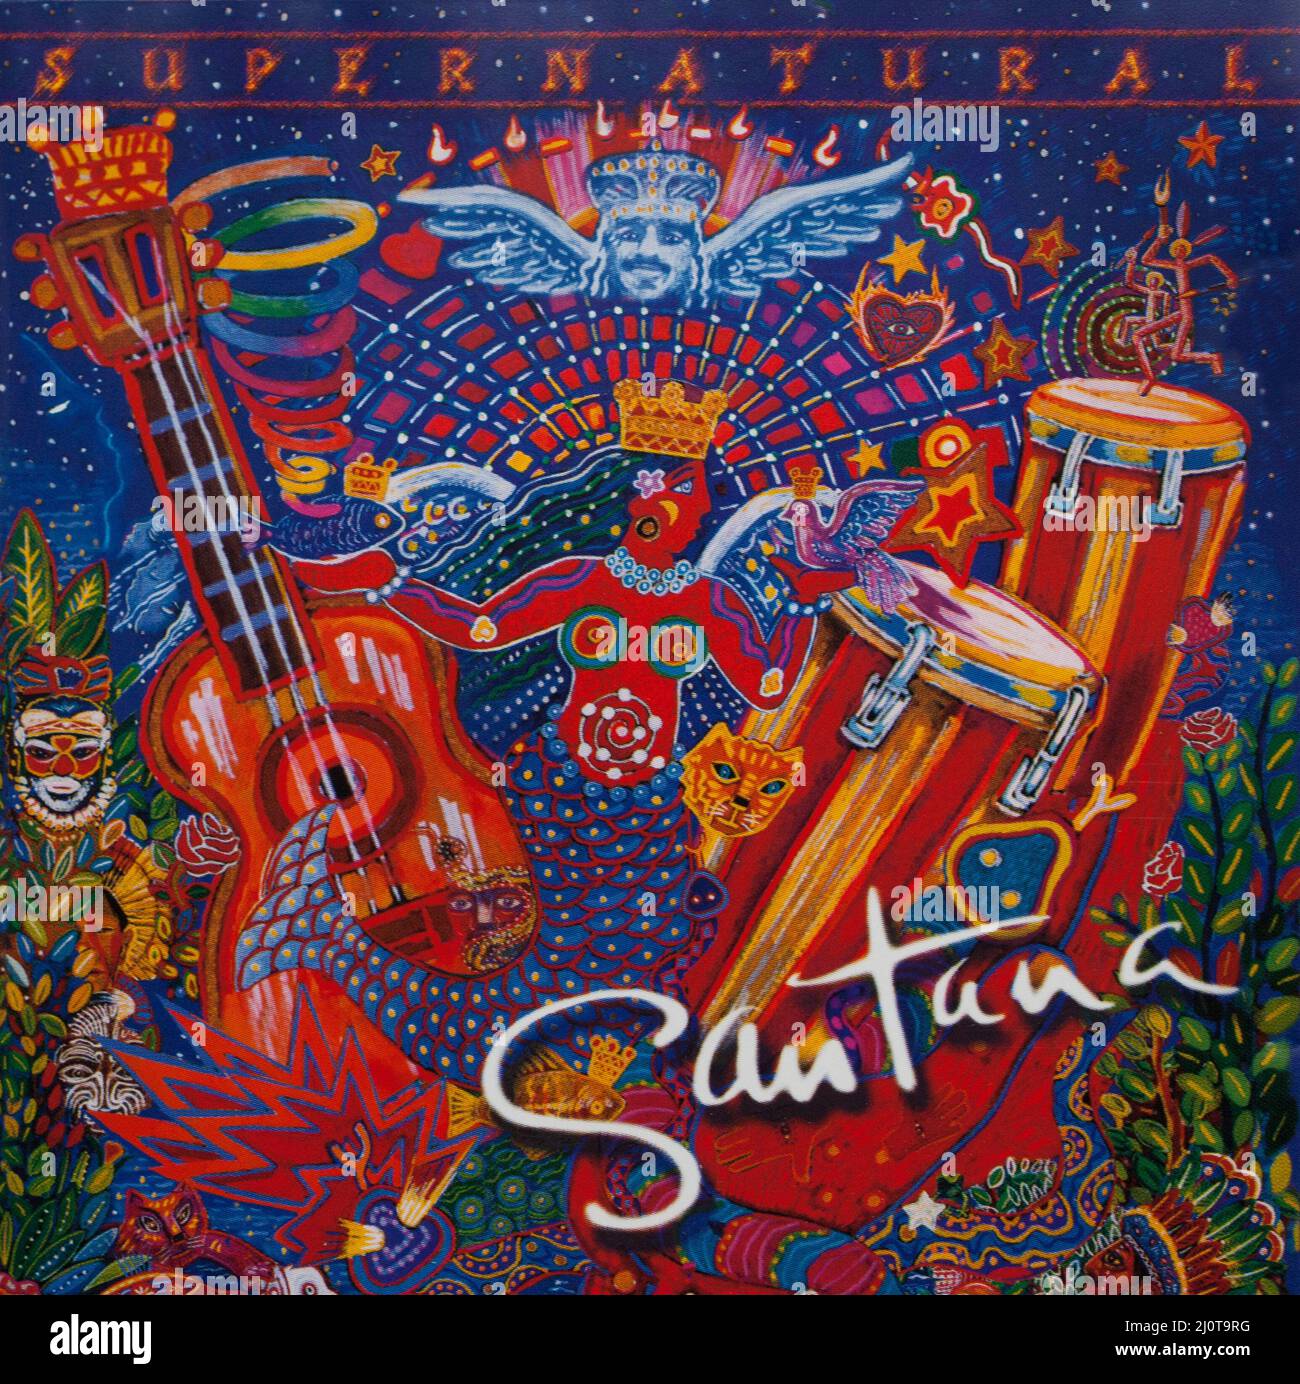 The CD Album cover to Supernatural by Santana Stock Photo